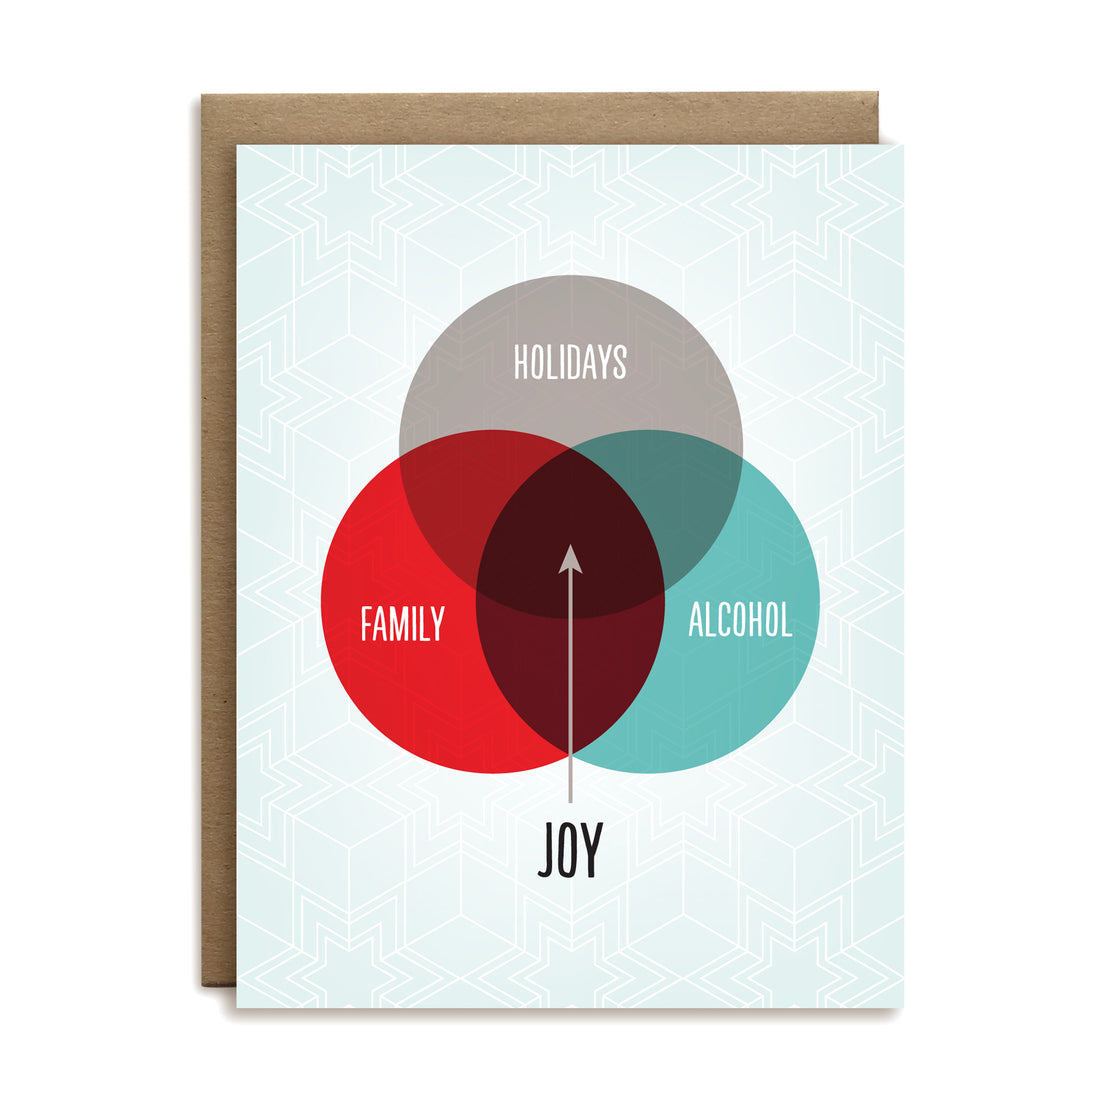 Venn diagram of family, alcohol and holidays where Joy is the overlap holiday greeting card by I’ll Know It When I See It